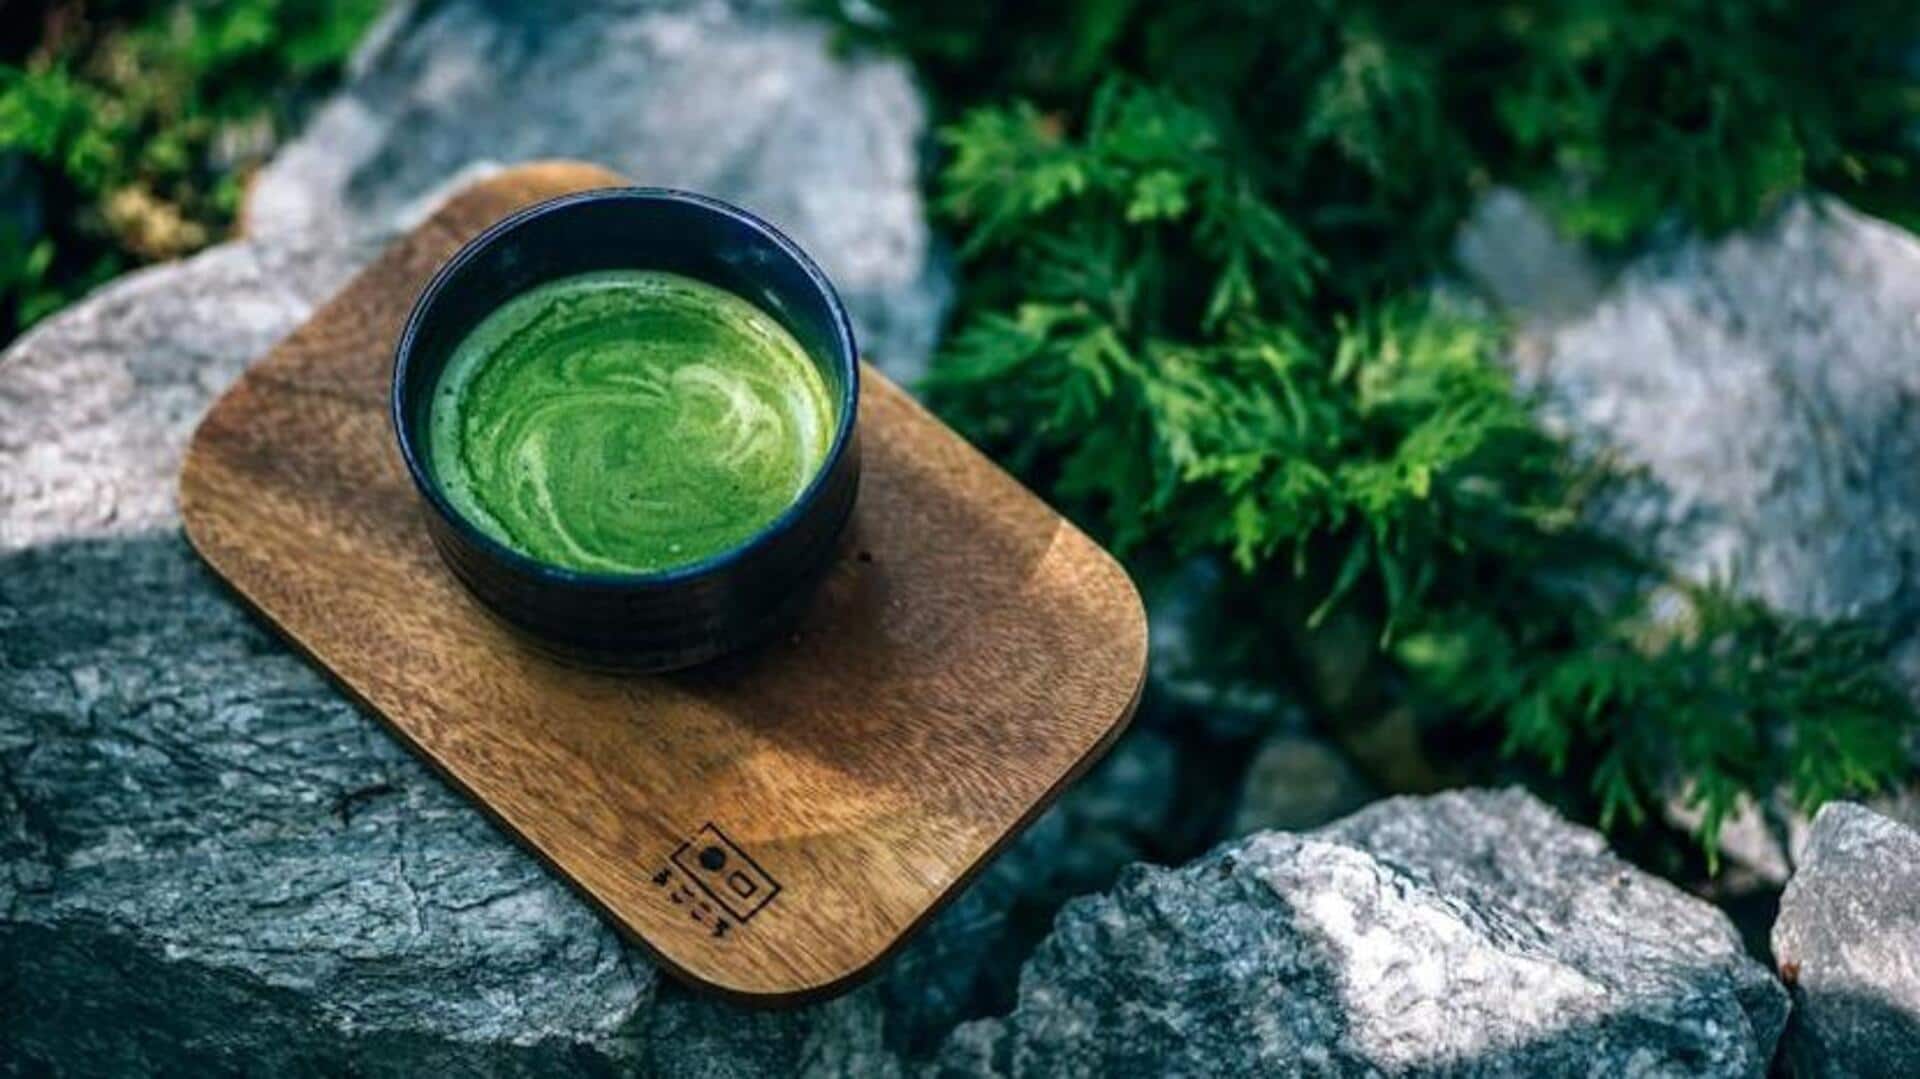 Indulge in these lip-smacking matcha vegan delights